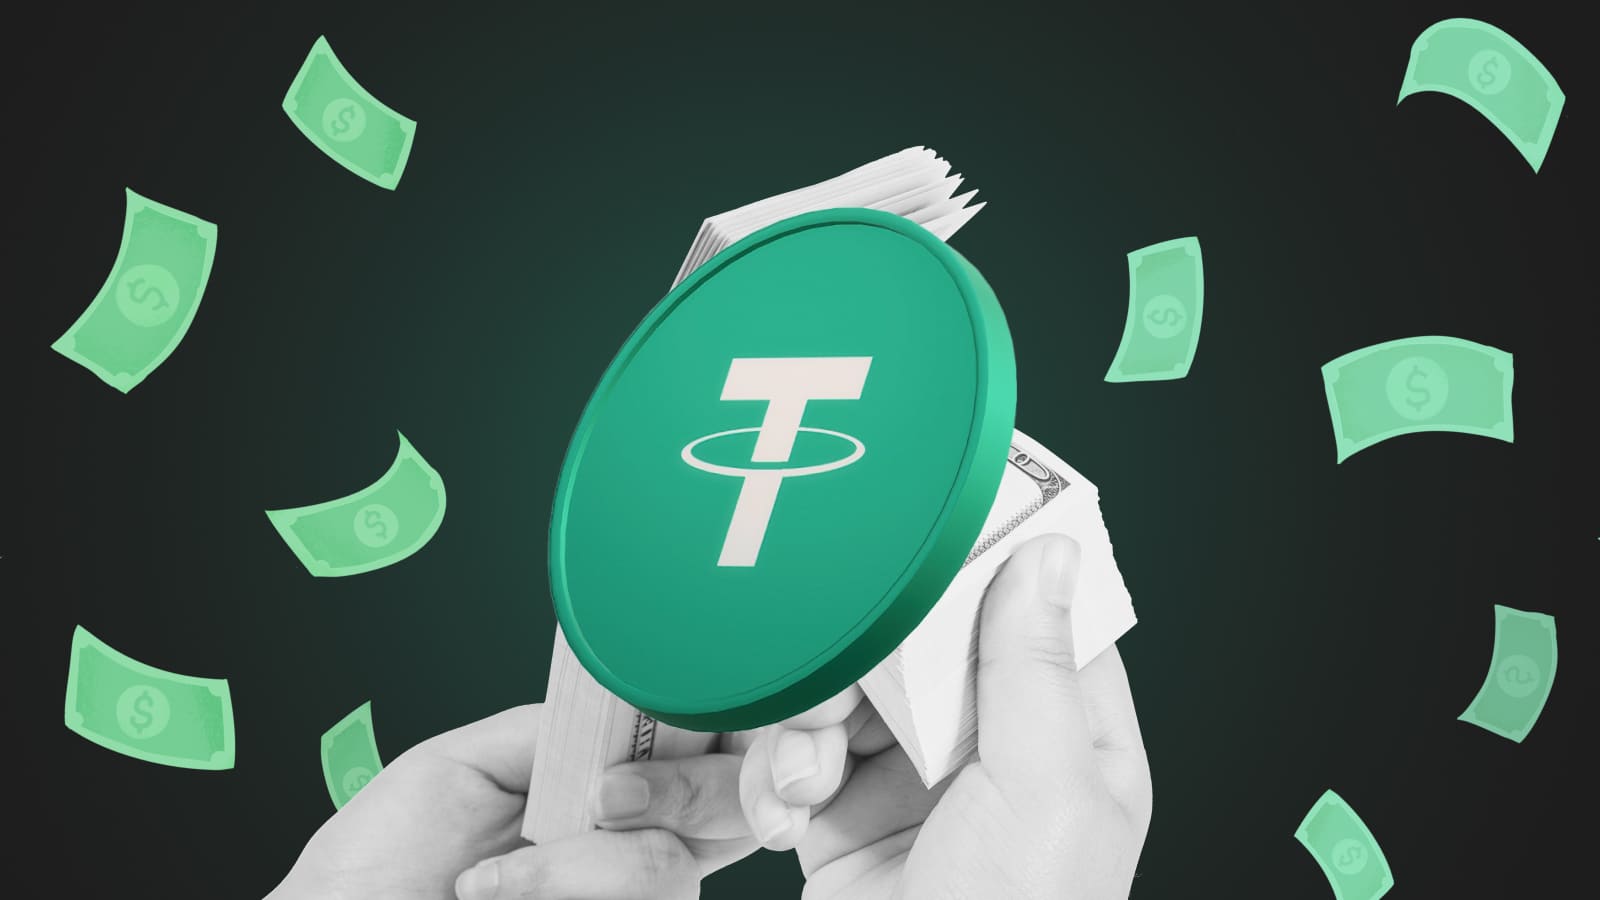 Is Tether (USDT) Fully Backed? Analyzing the Audit Results